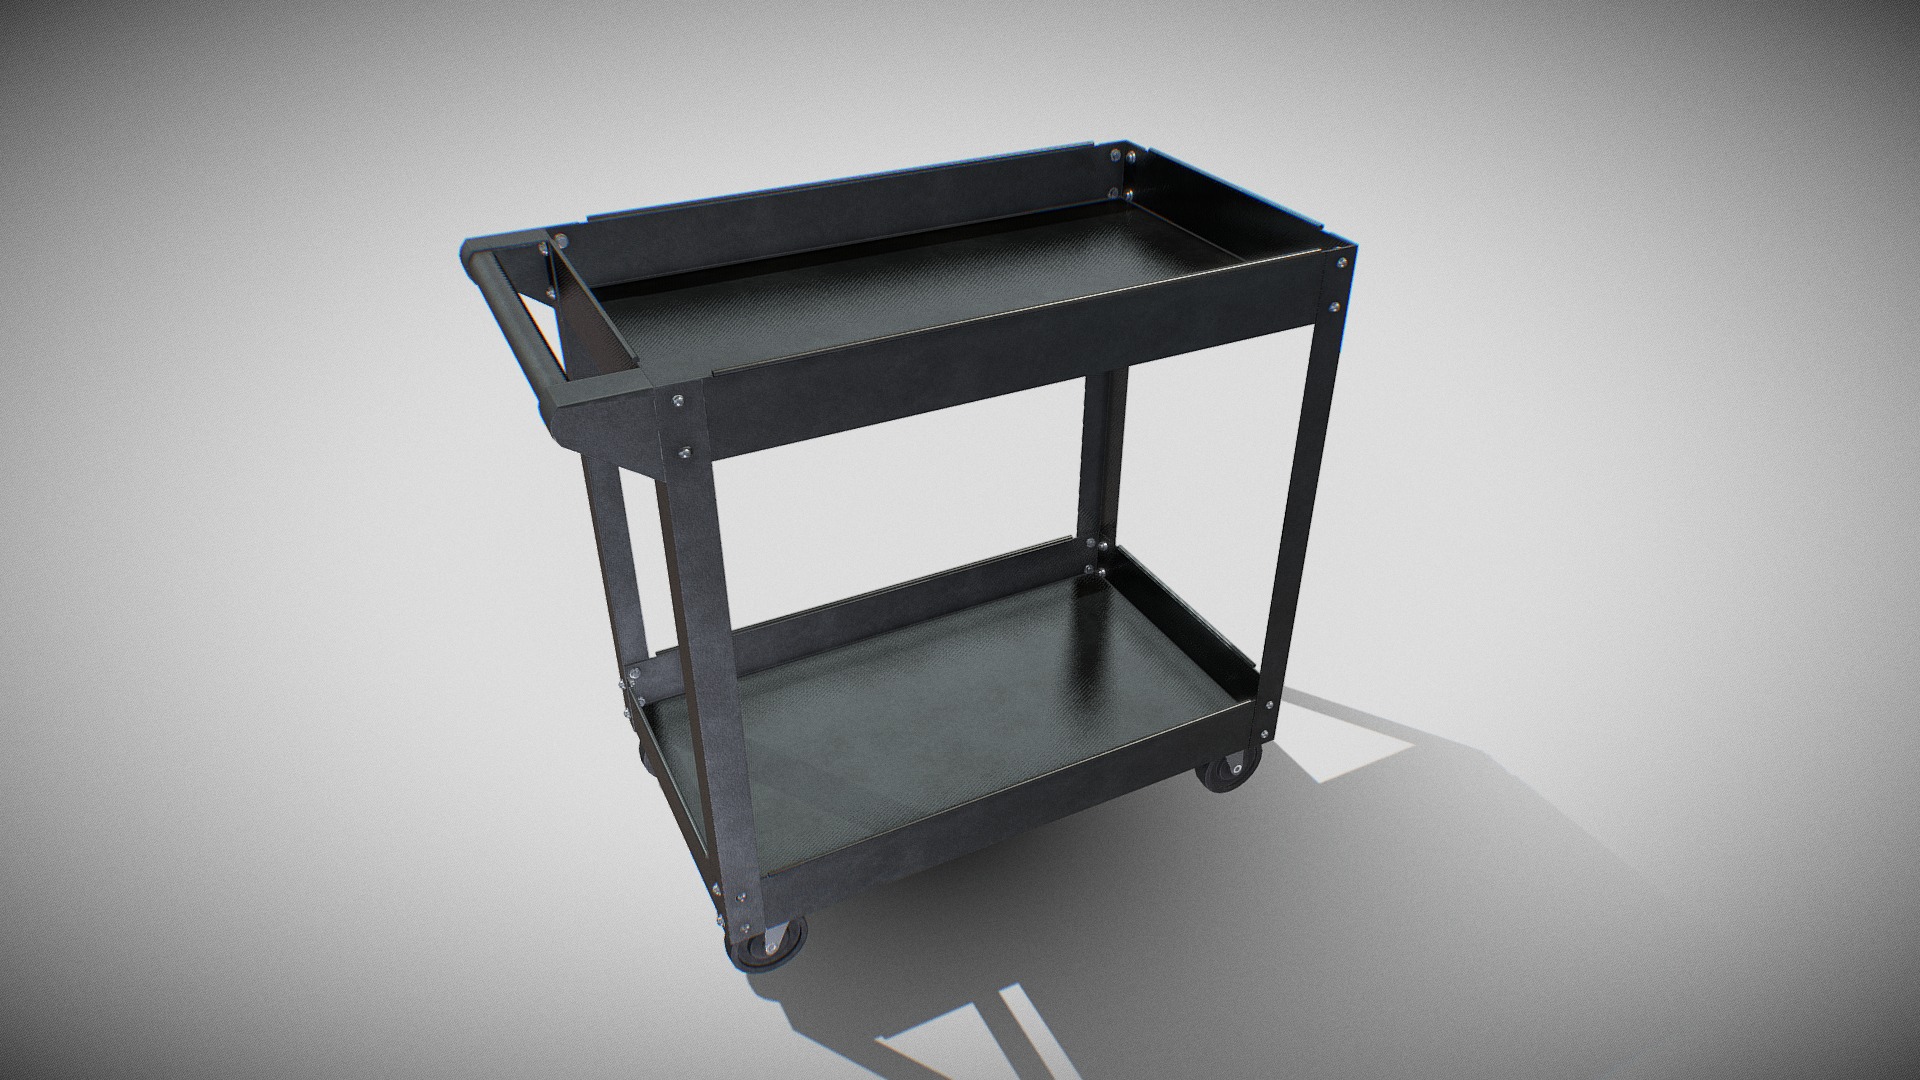 3D model SteelCart dark painted - This is a 3D model of the SteelCart dark painted. The 3D model is about a black table with wheels.